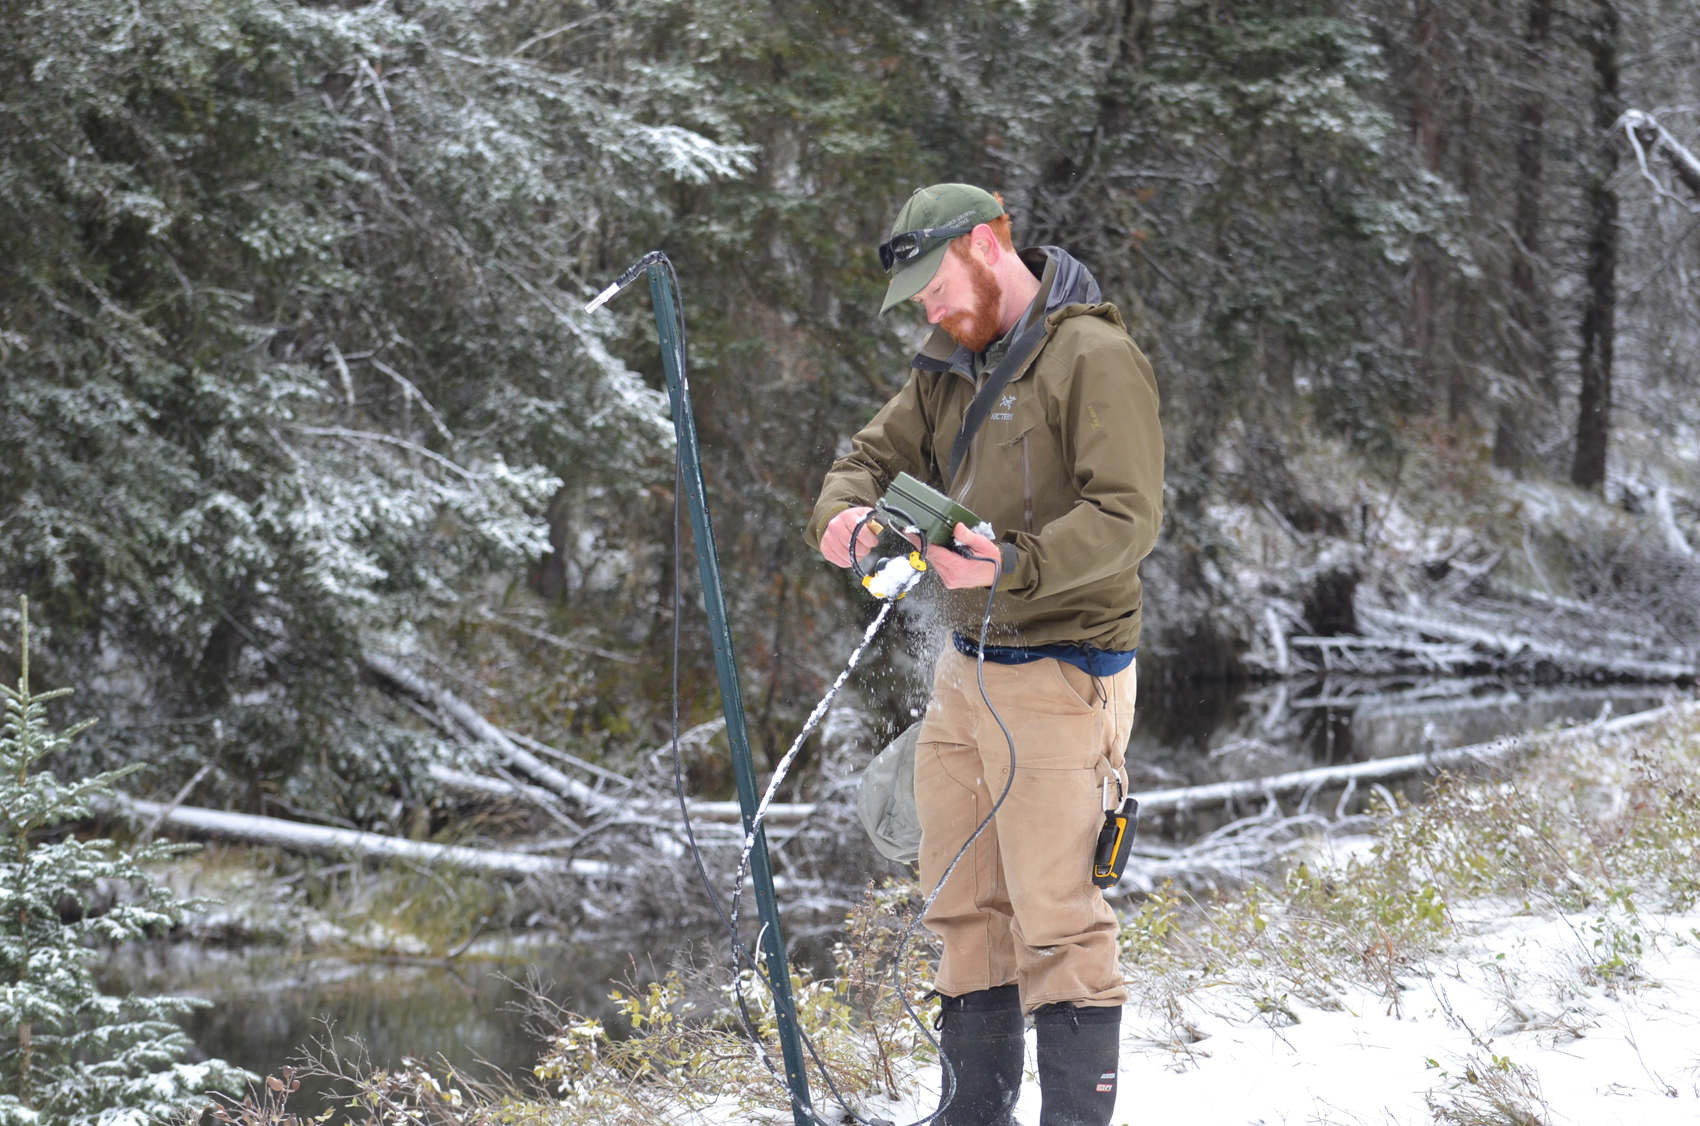 Adam Sprott checking bat detectors in on a snowy day.